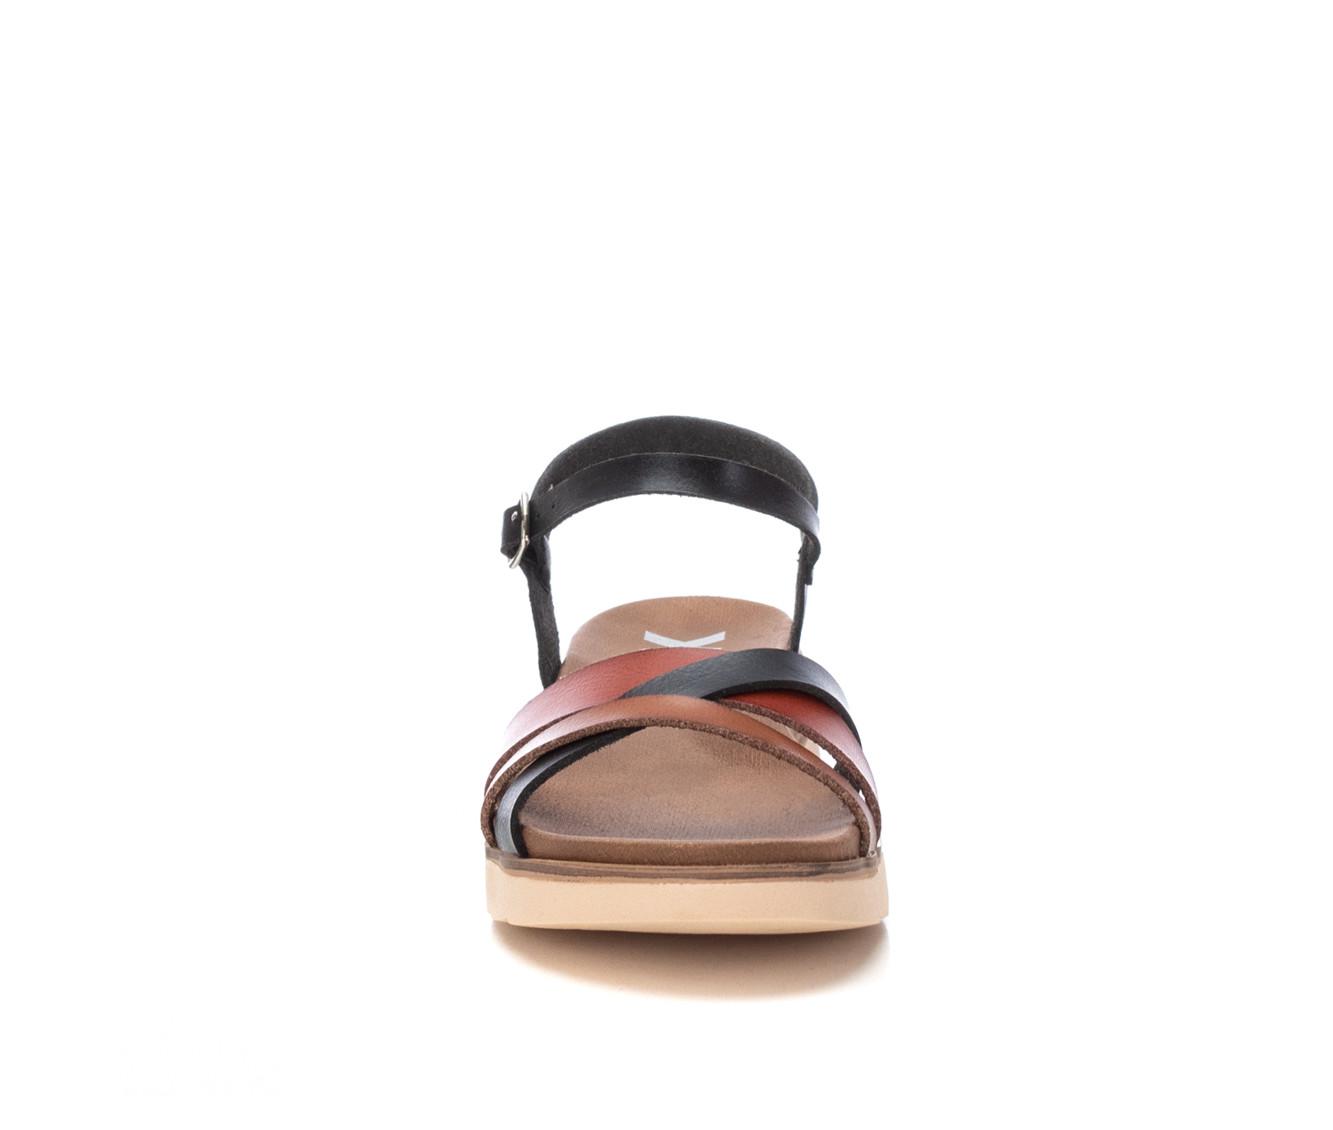 Women's Xti Lily Wedge Sandals